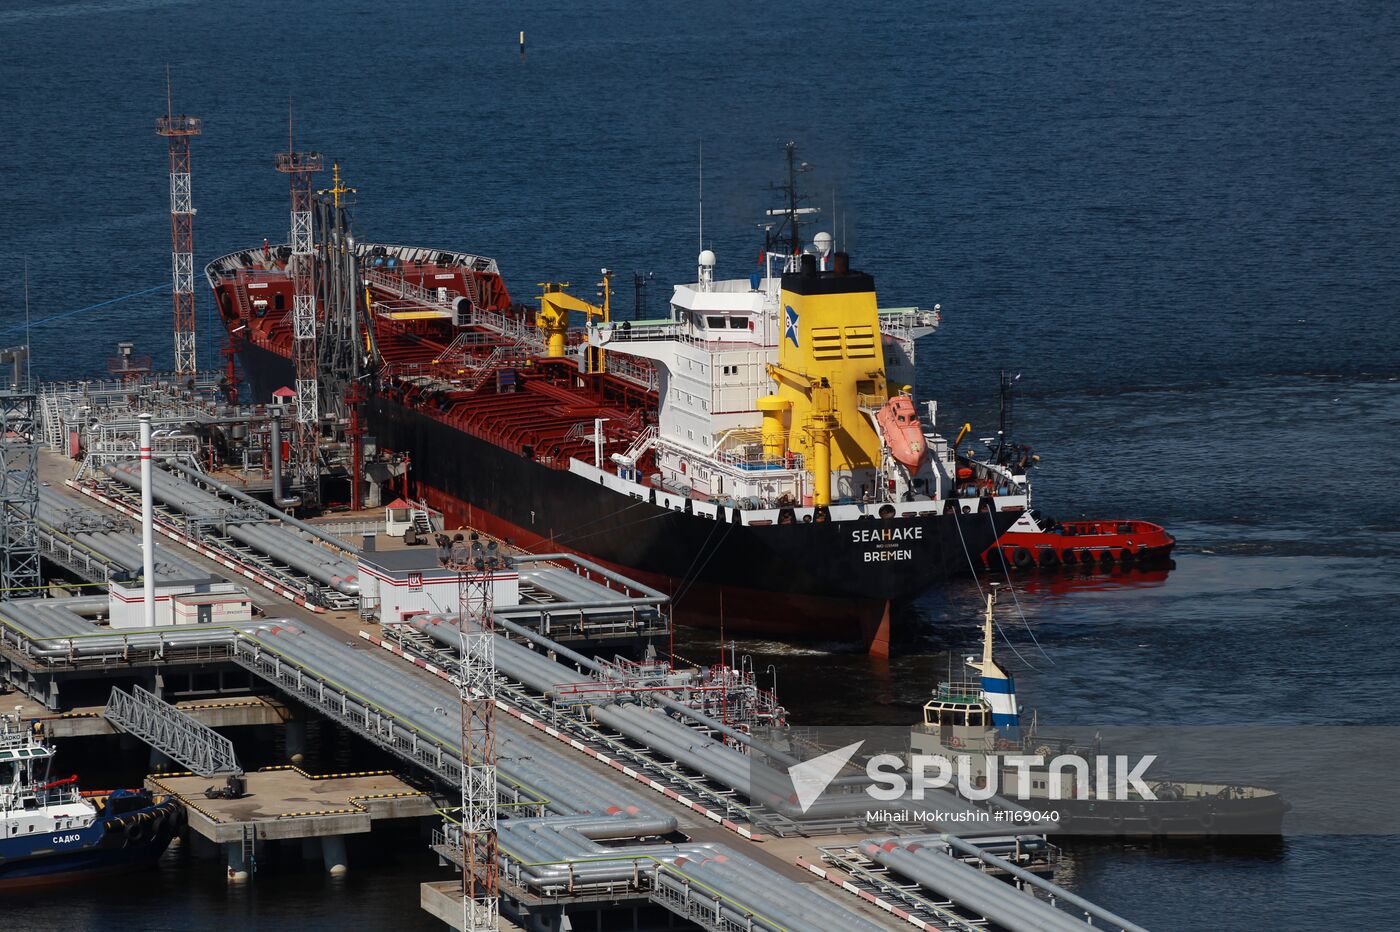 Work of Vysotsk-Lukoil-II distribution and transshipment complex